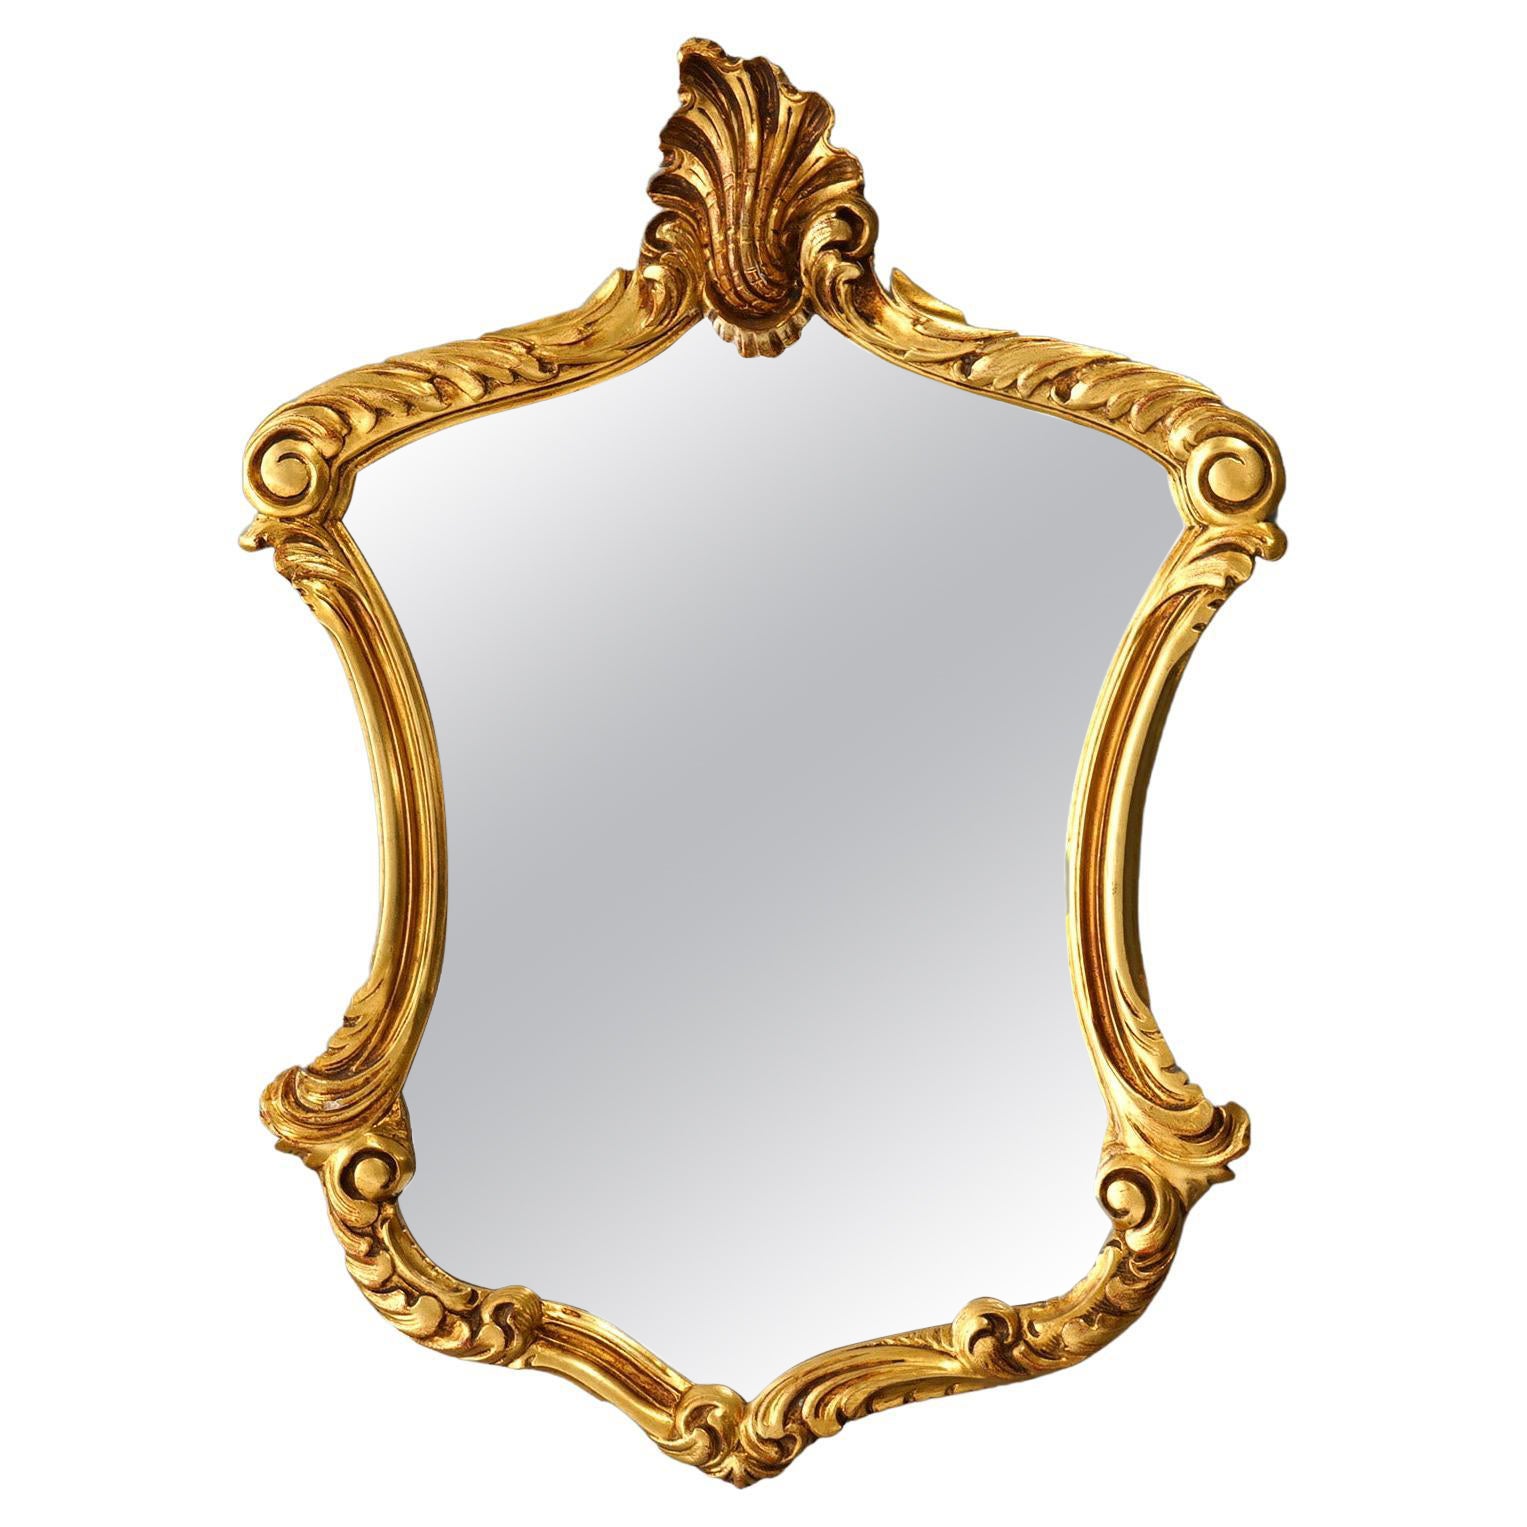 French Rococo Style Giltwood Wall Mirror, 20th C